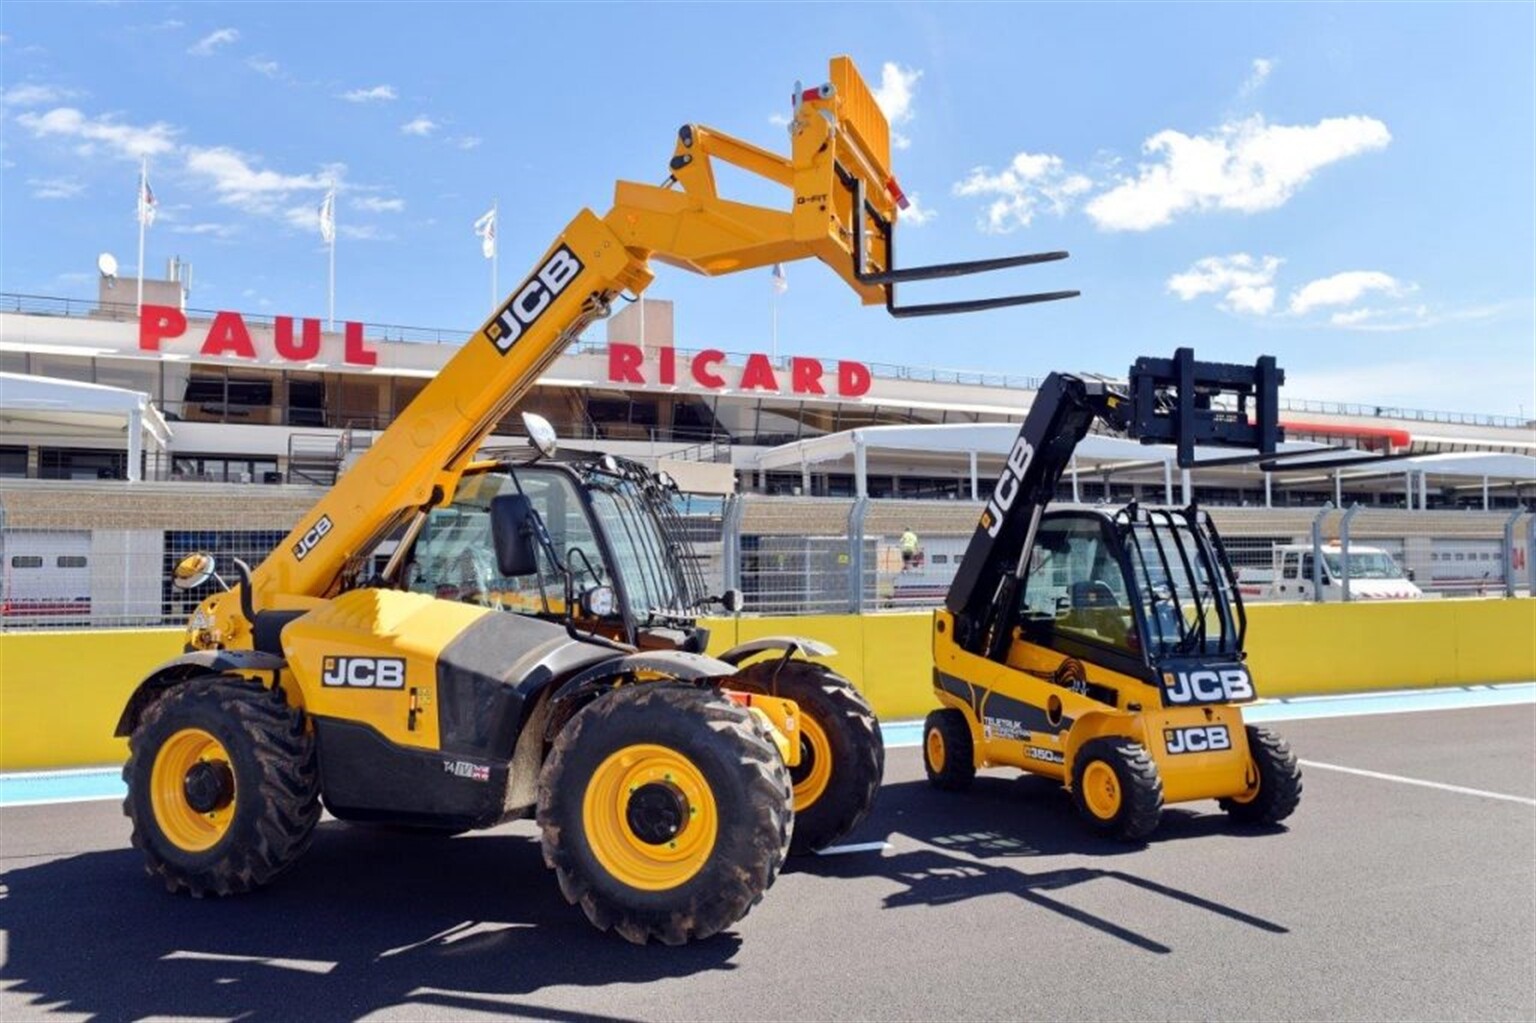 JCB on the starting grid for French Grand Prix Support